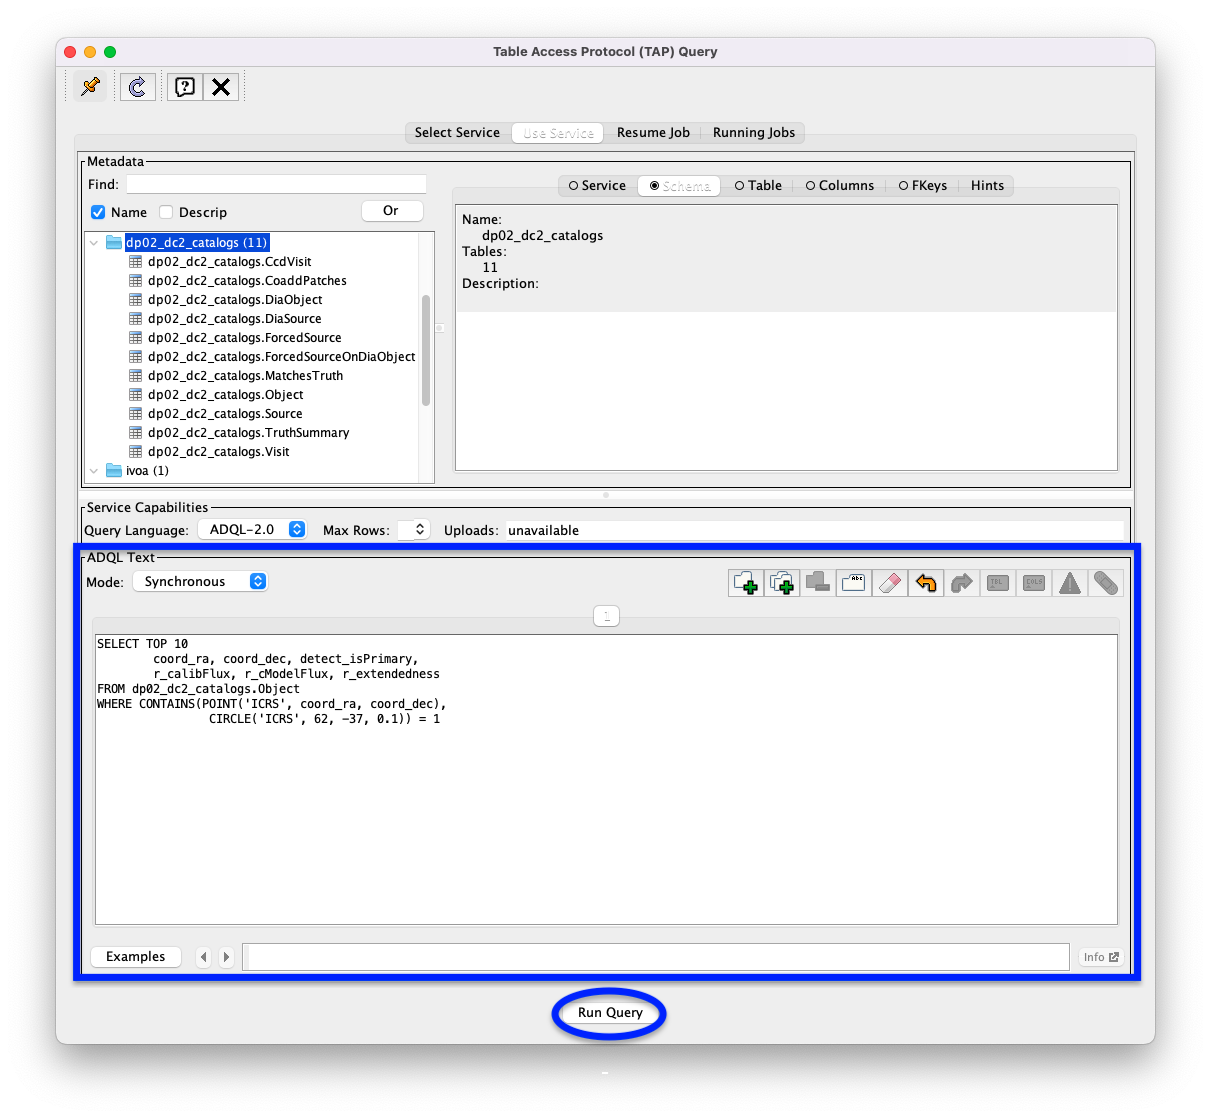 A screenshot of the Table Access Protocol (TAP) Query window. A list of DP0.2 tables is shown in the top, Metadata panel. A simple ADQL query is shown in the bottom, ADQL Text panel. A blue rectangle highlights the ADQL Text panel. A blue oval highlights the Run Query button. The ADQL Text panel and the "Run Query" button are highlighted with a blue rectangle and a blue oval, respectively.